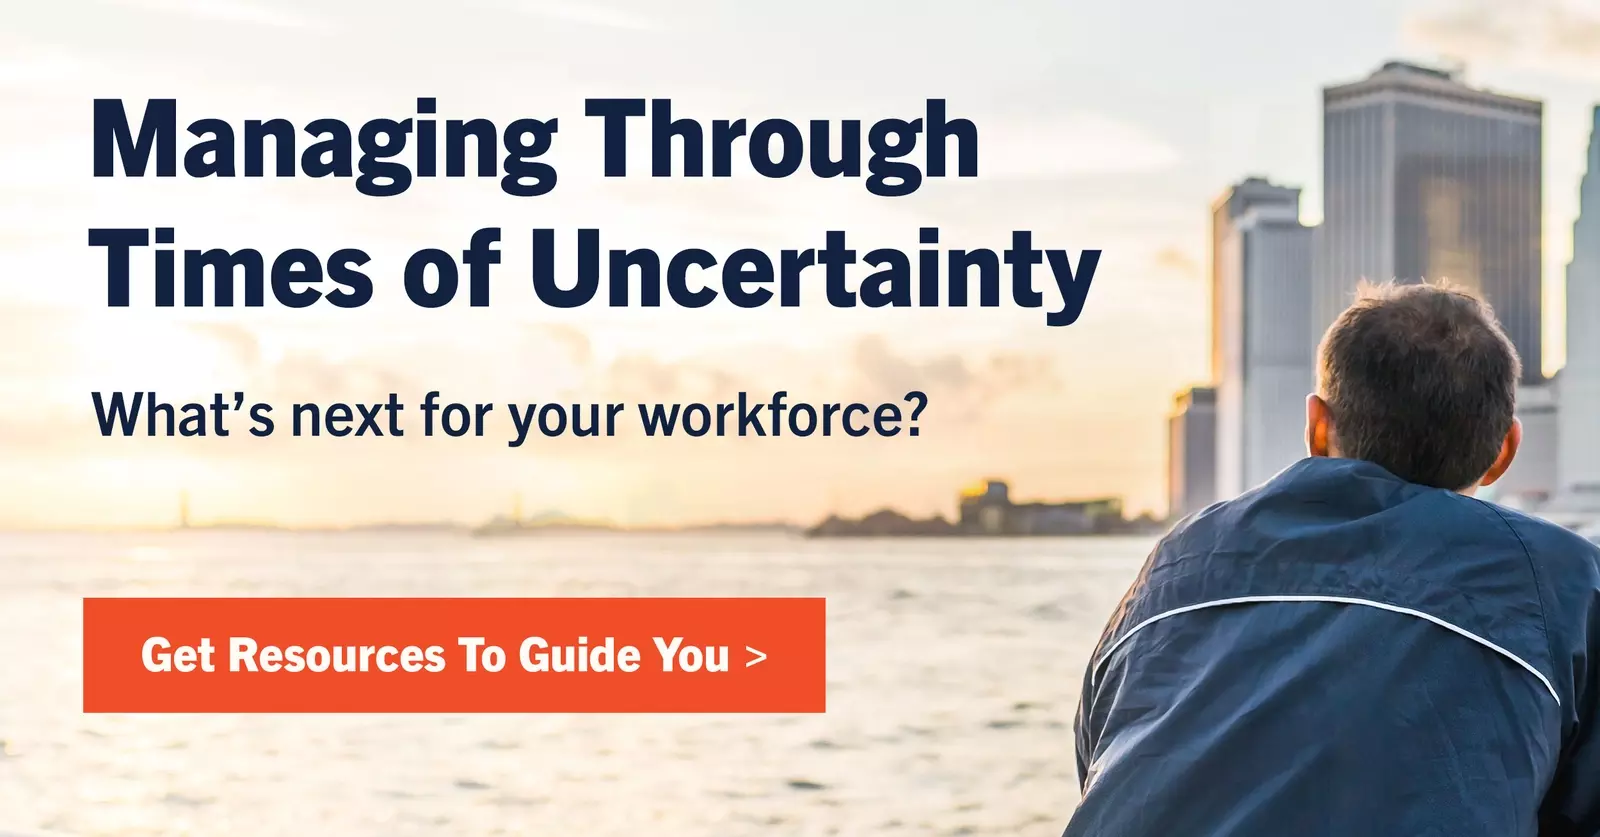 Managing through uncertainty holidays 2020 banner